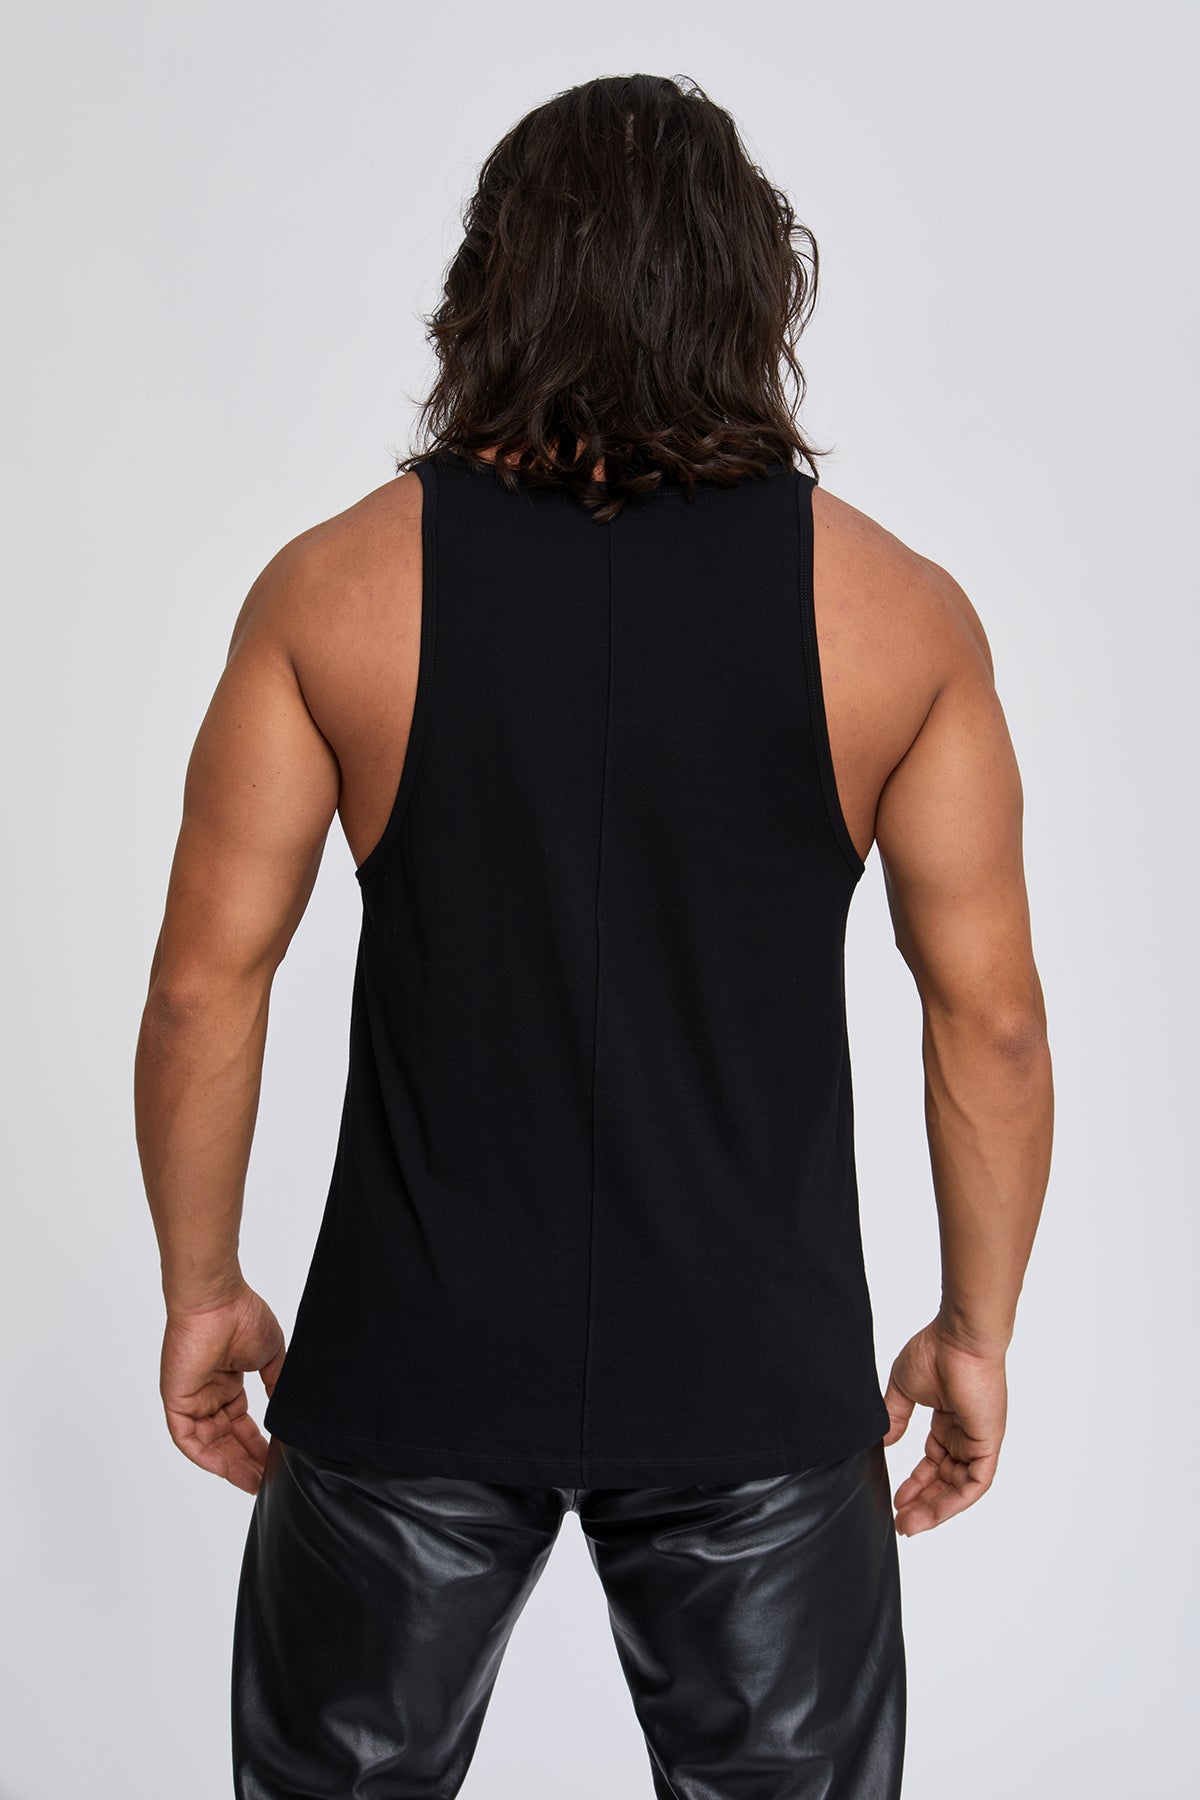 Men's tank tops. 100 % Turkish Pima cotton. Middle center front and middle center back pintuck preshrunk. Sports. Gym. Work Out. Yoga.